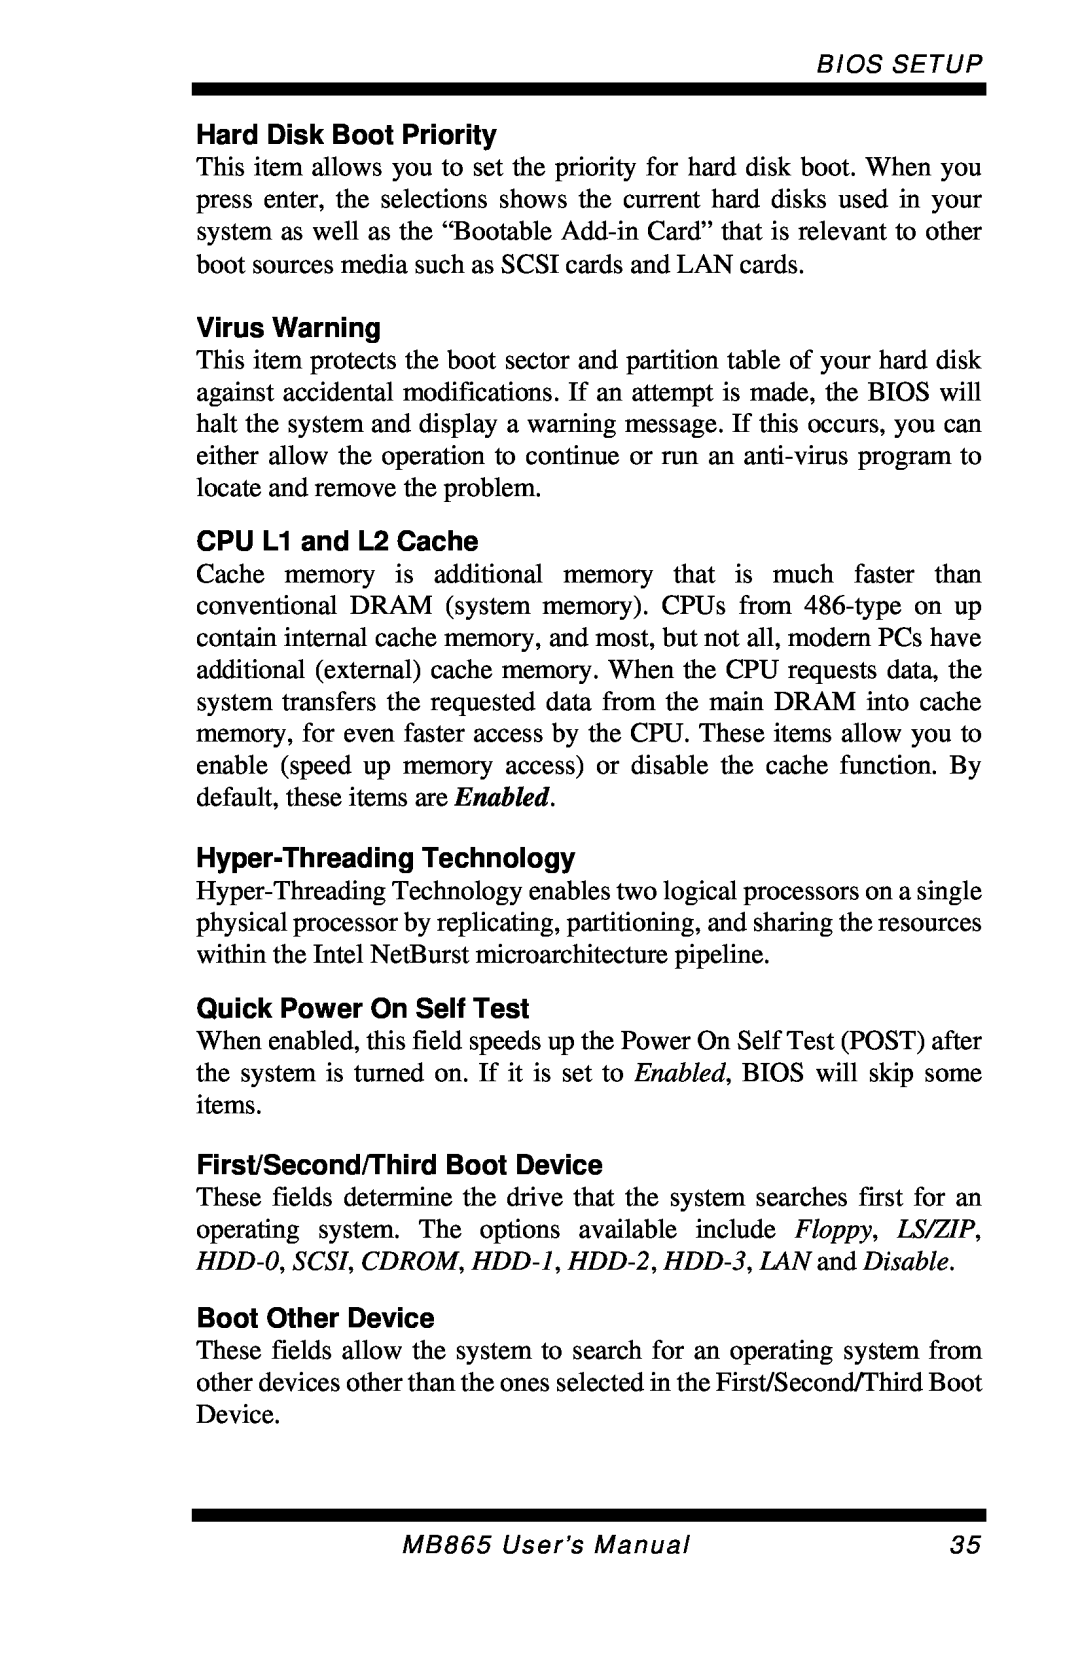 Intel MB865 Hard Disk Boot Priority, Virus Warning, CPU L1 and L2 Cache, Hyper-ThreadingTechnology, Boot Other Device 